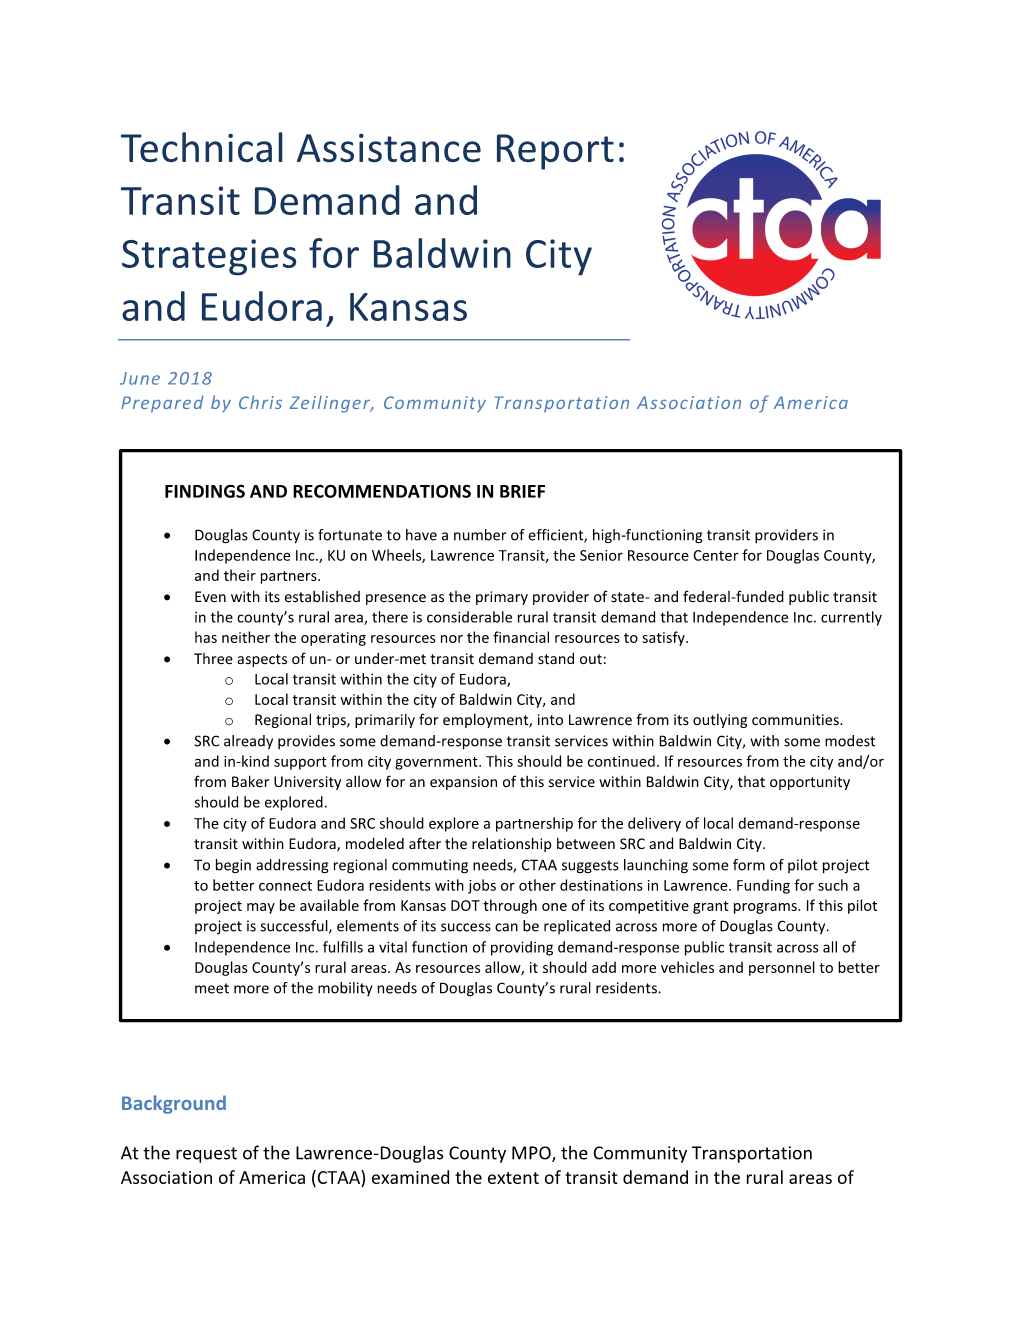 CTAA Technical Assist Report: Transit Demand and Strategies for Baldwin